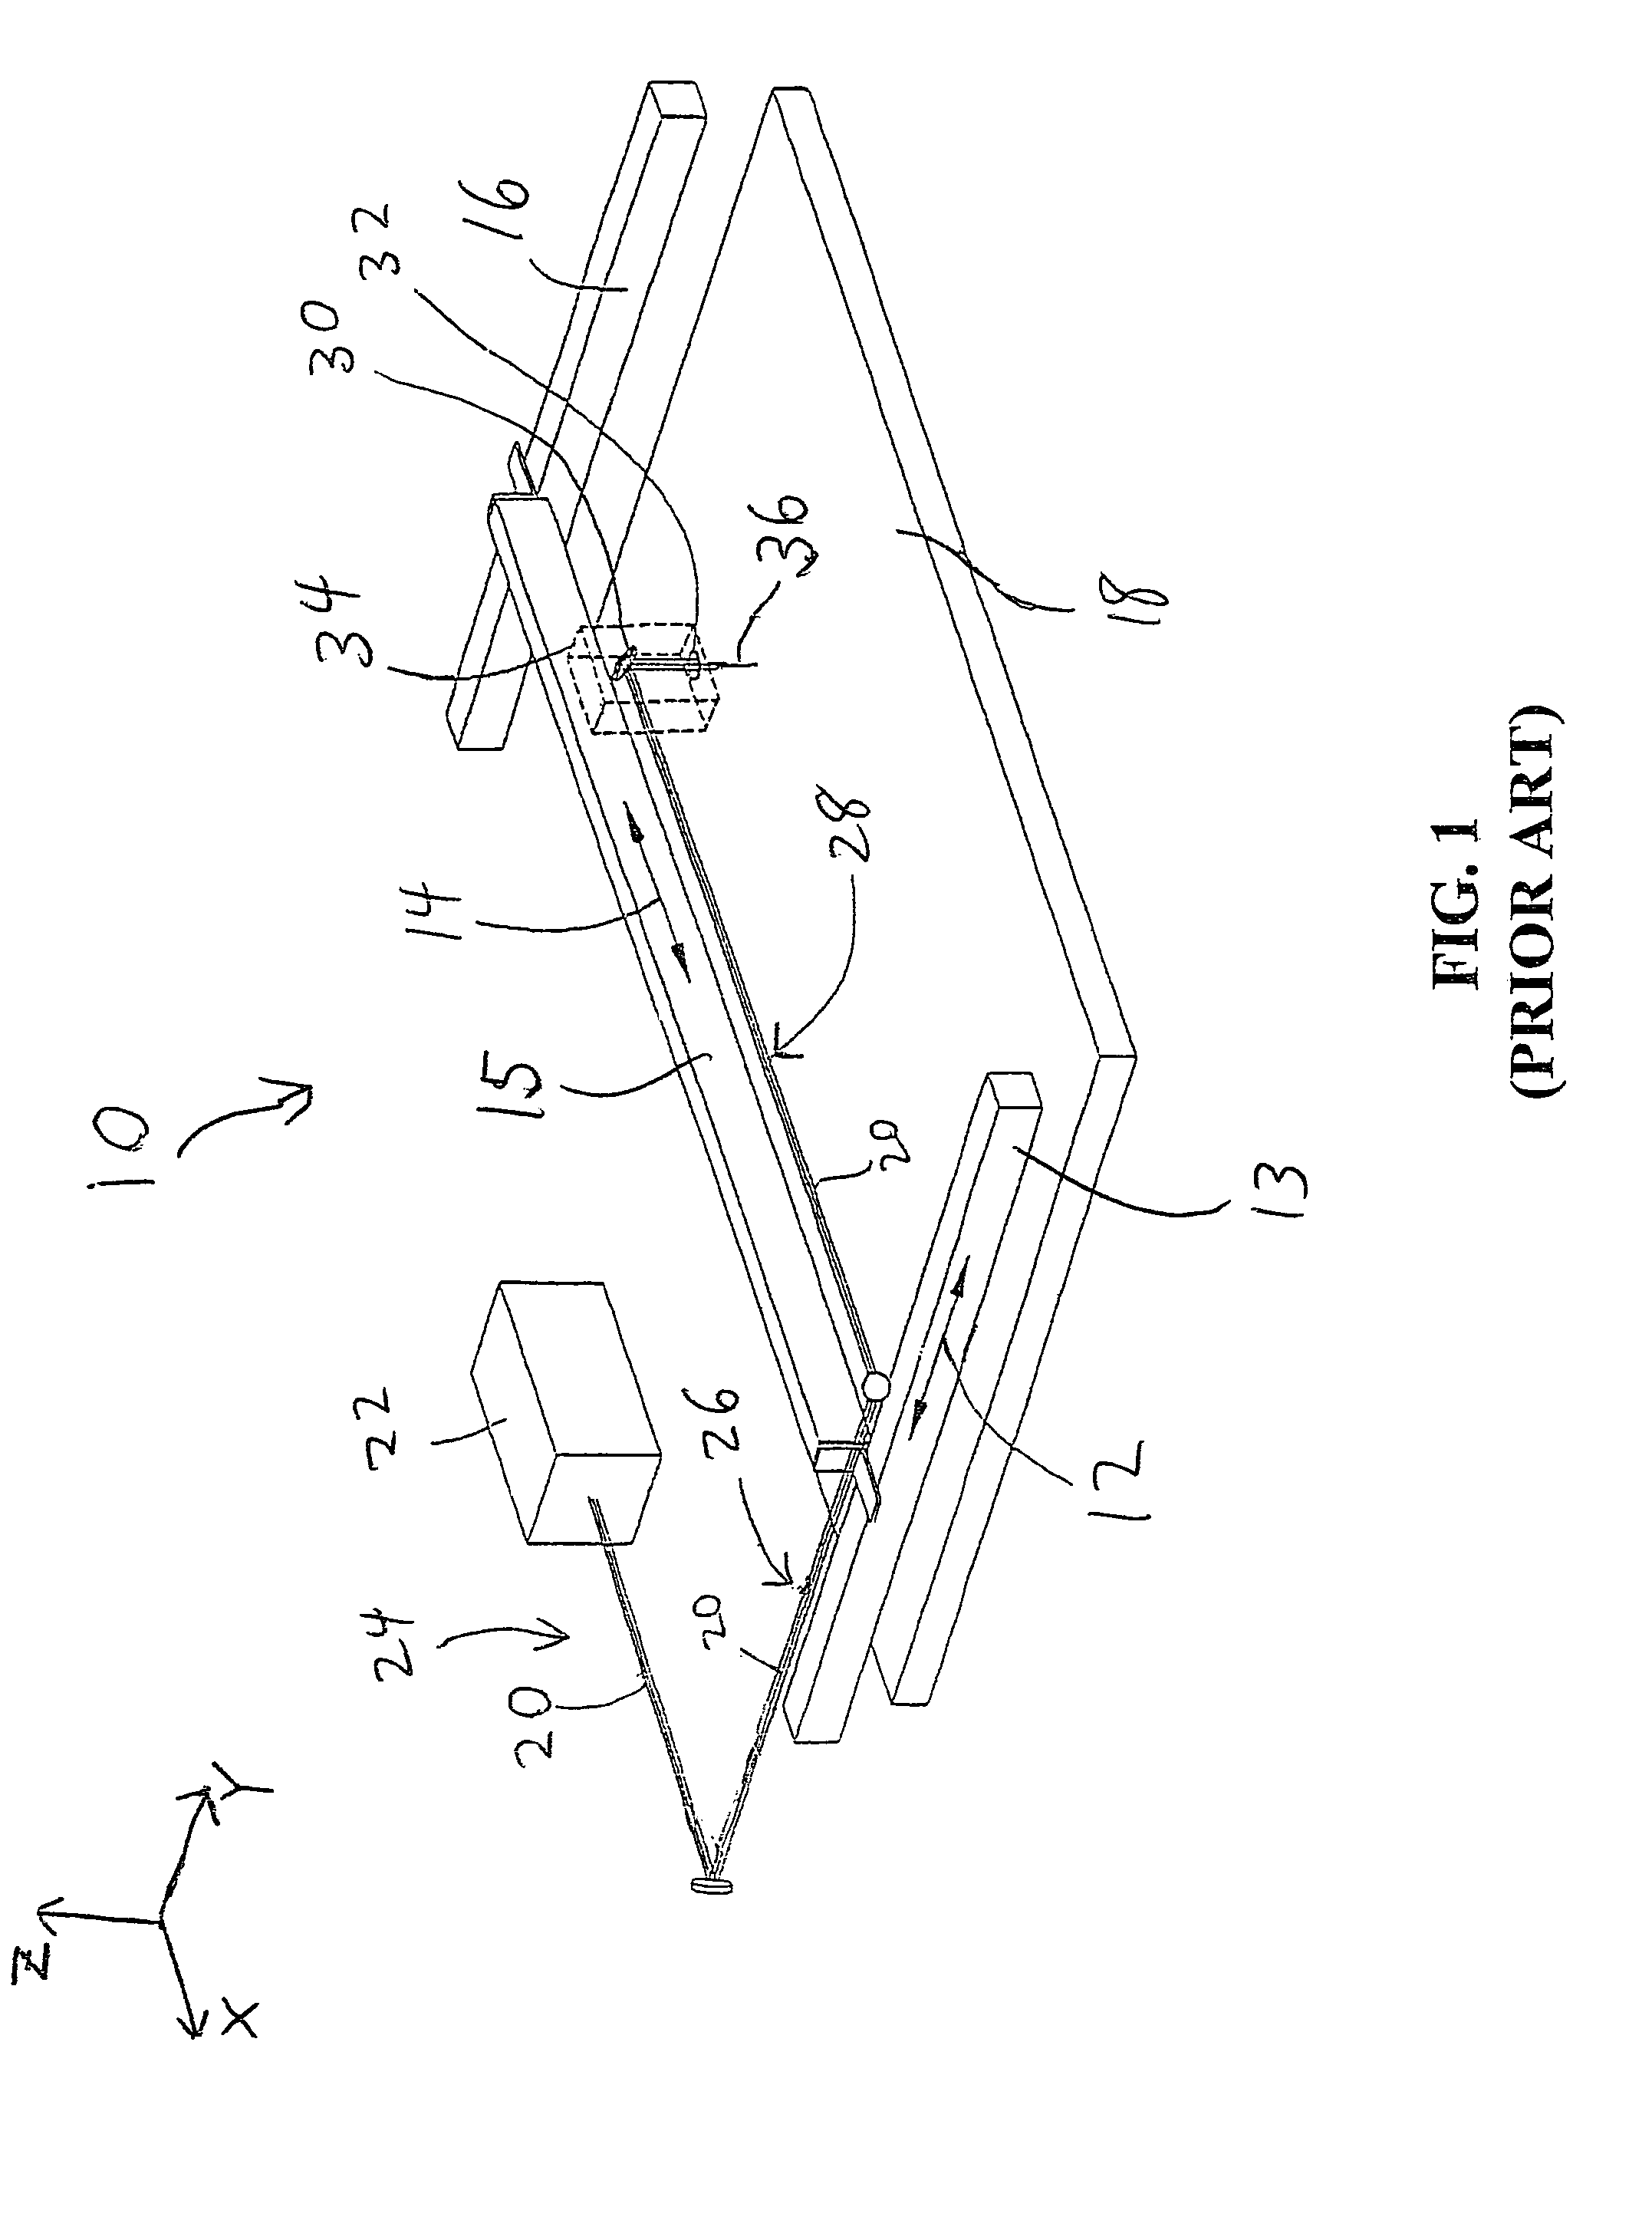 High resolution laser beam delivery apparatus